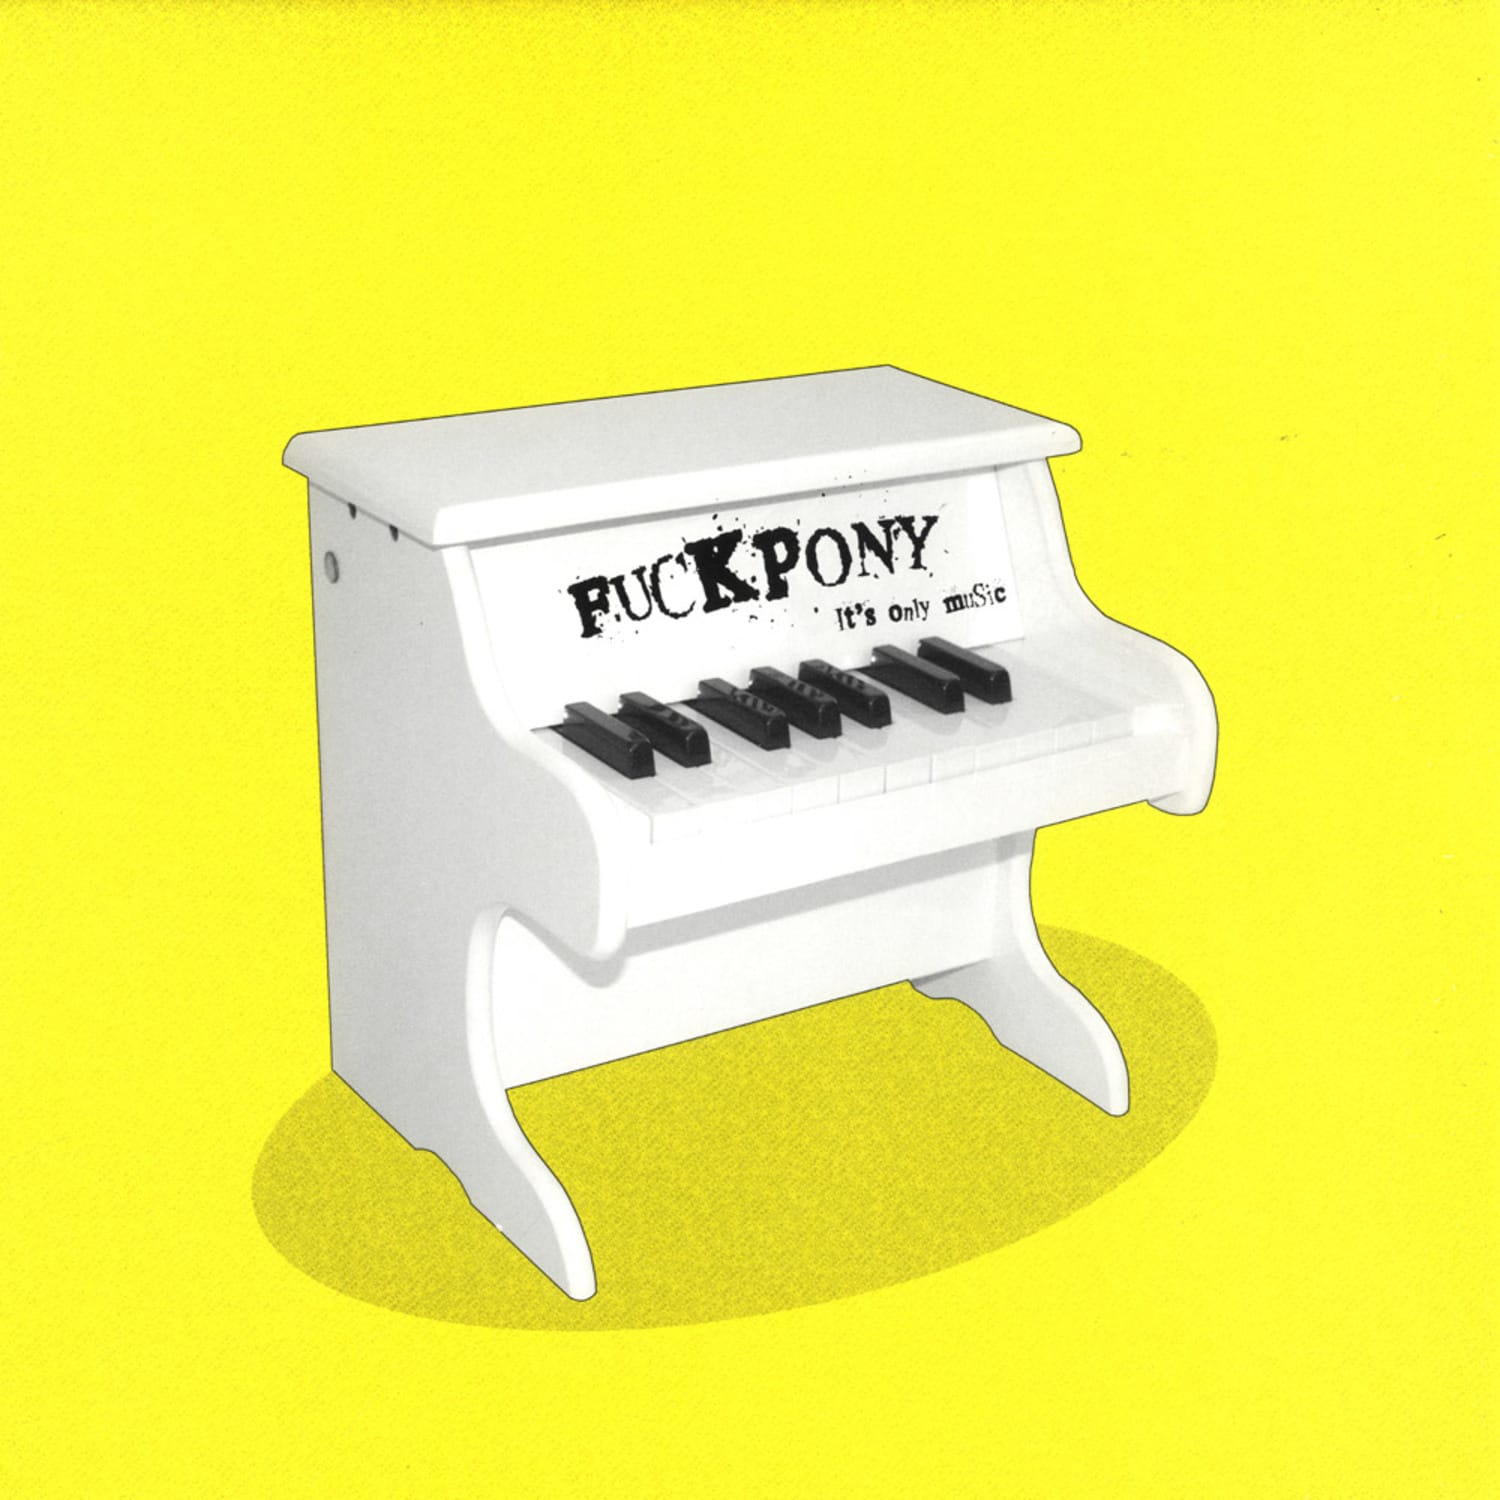 Fuckpony - ITS ONLY MUSIC